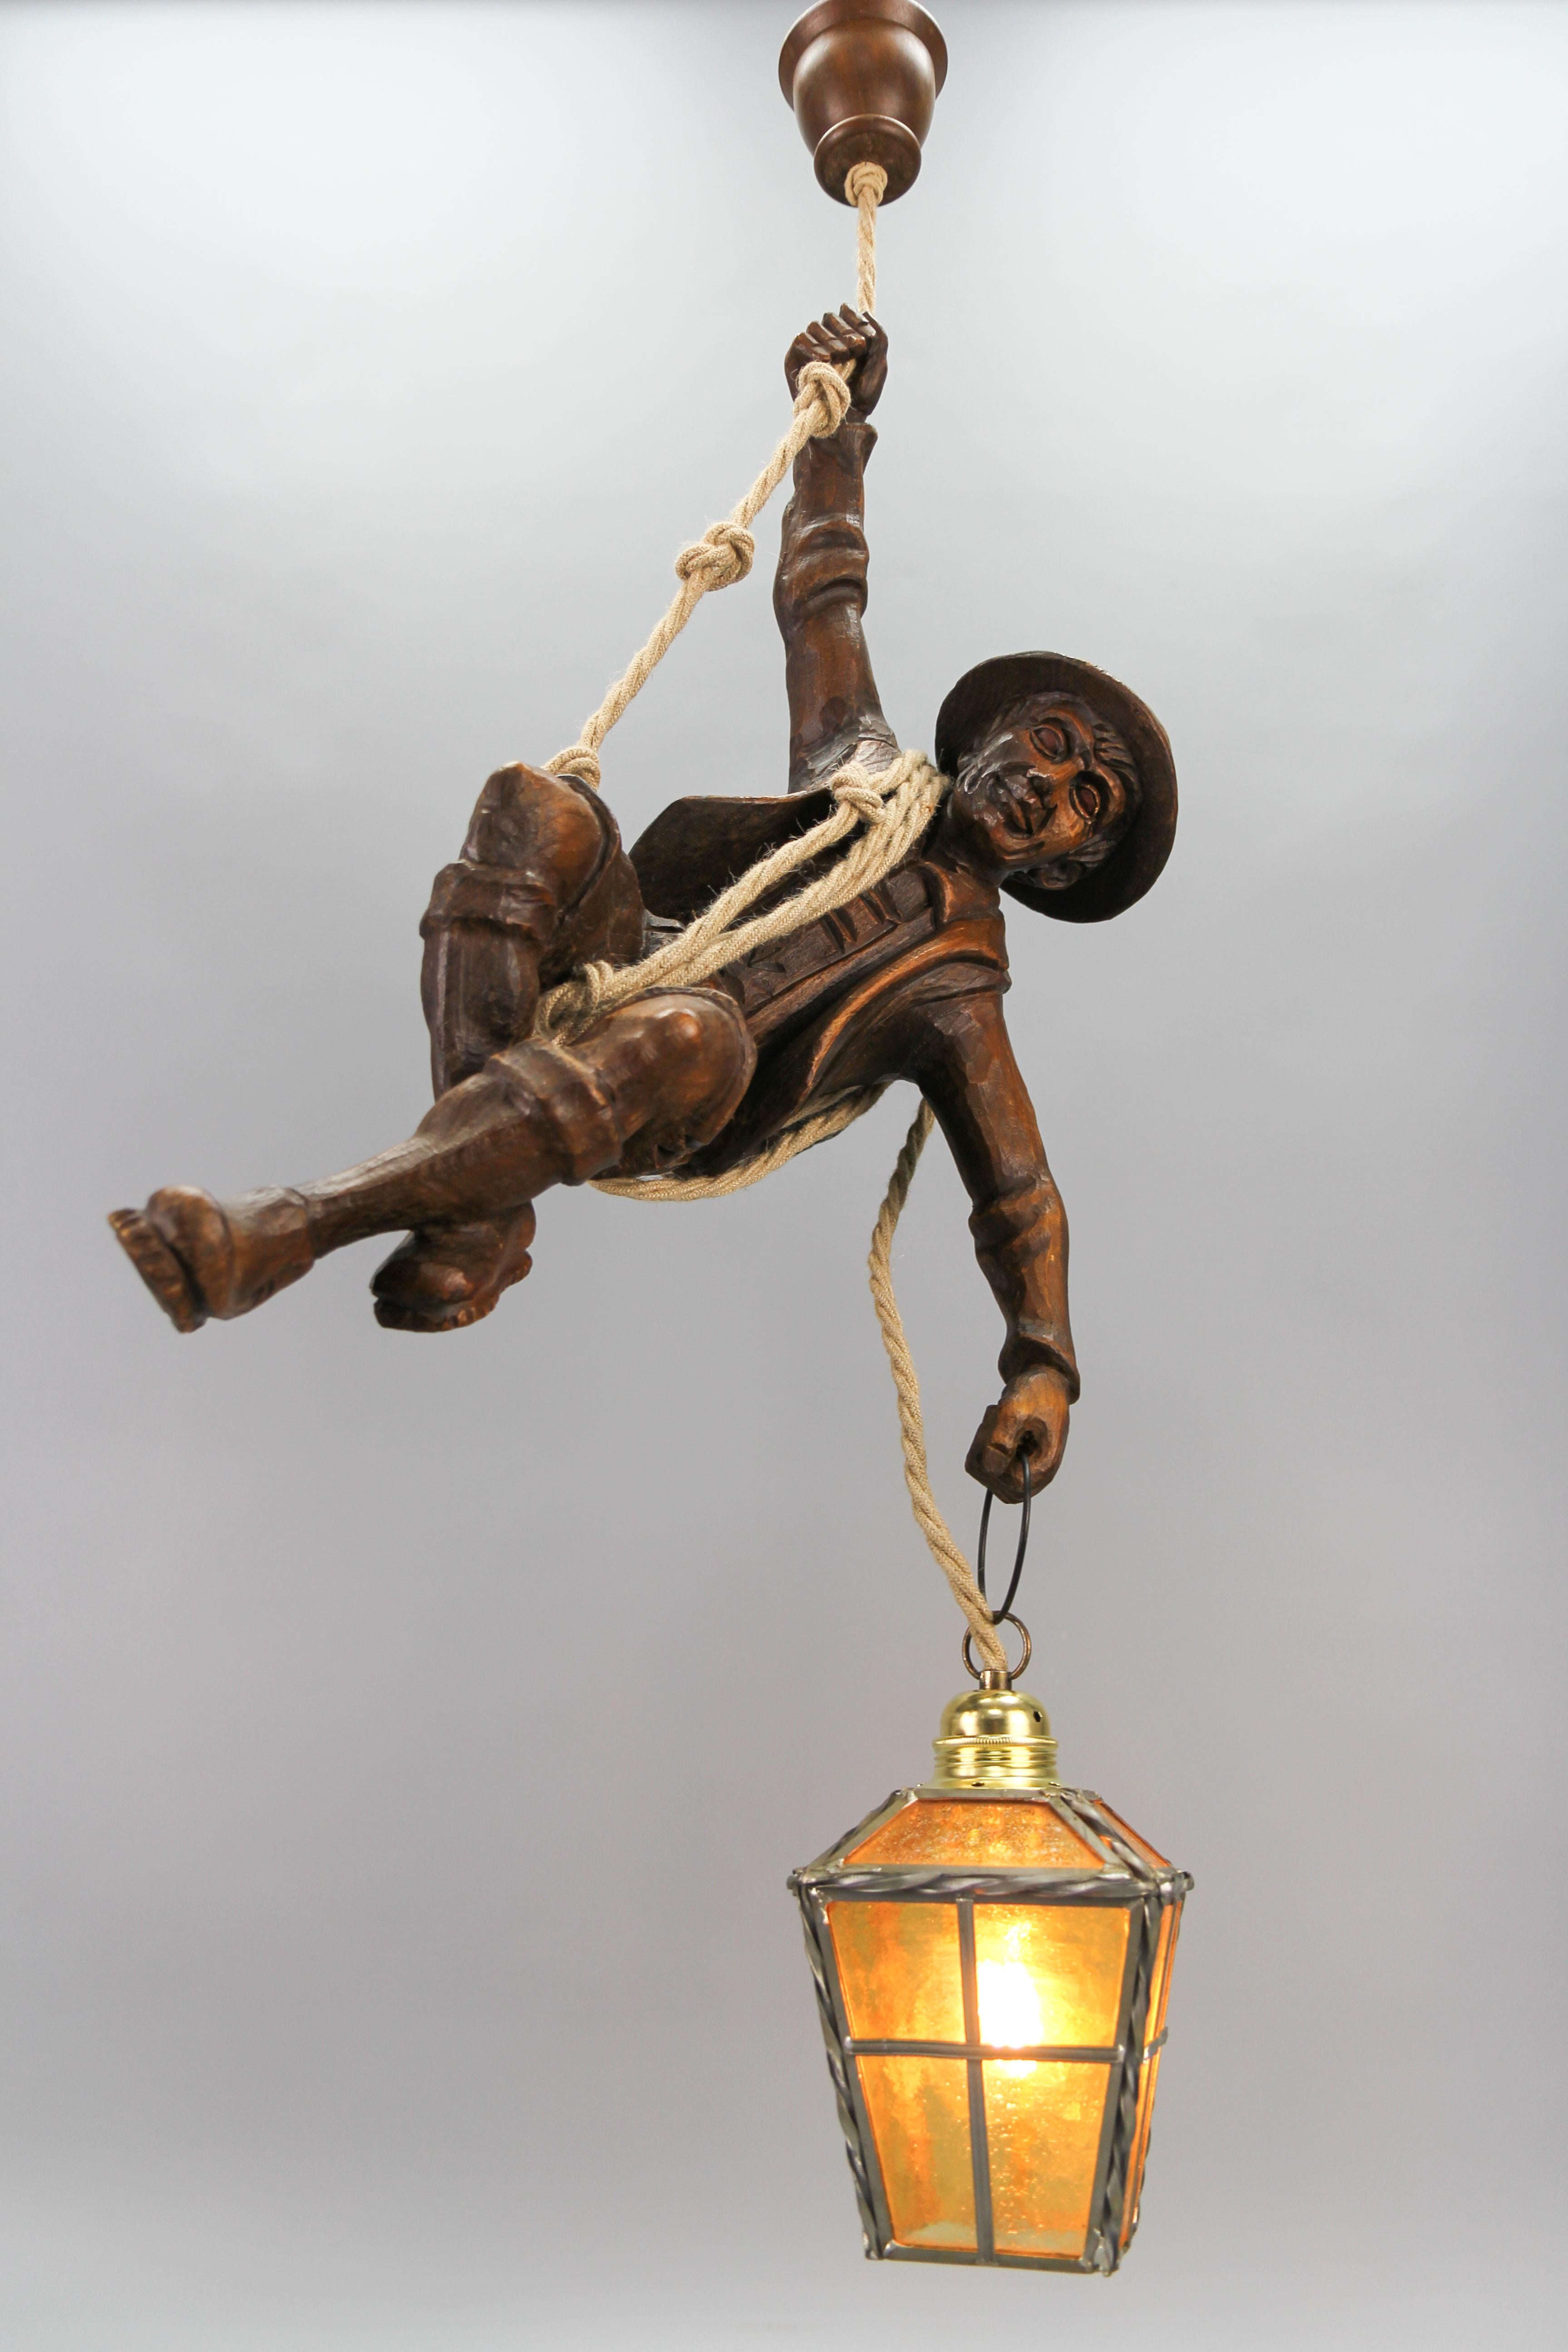 Large Pendant Light Fixture with Carved Climber Figure and Lantern, Germany For Sale 3